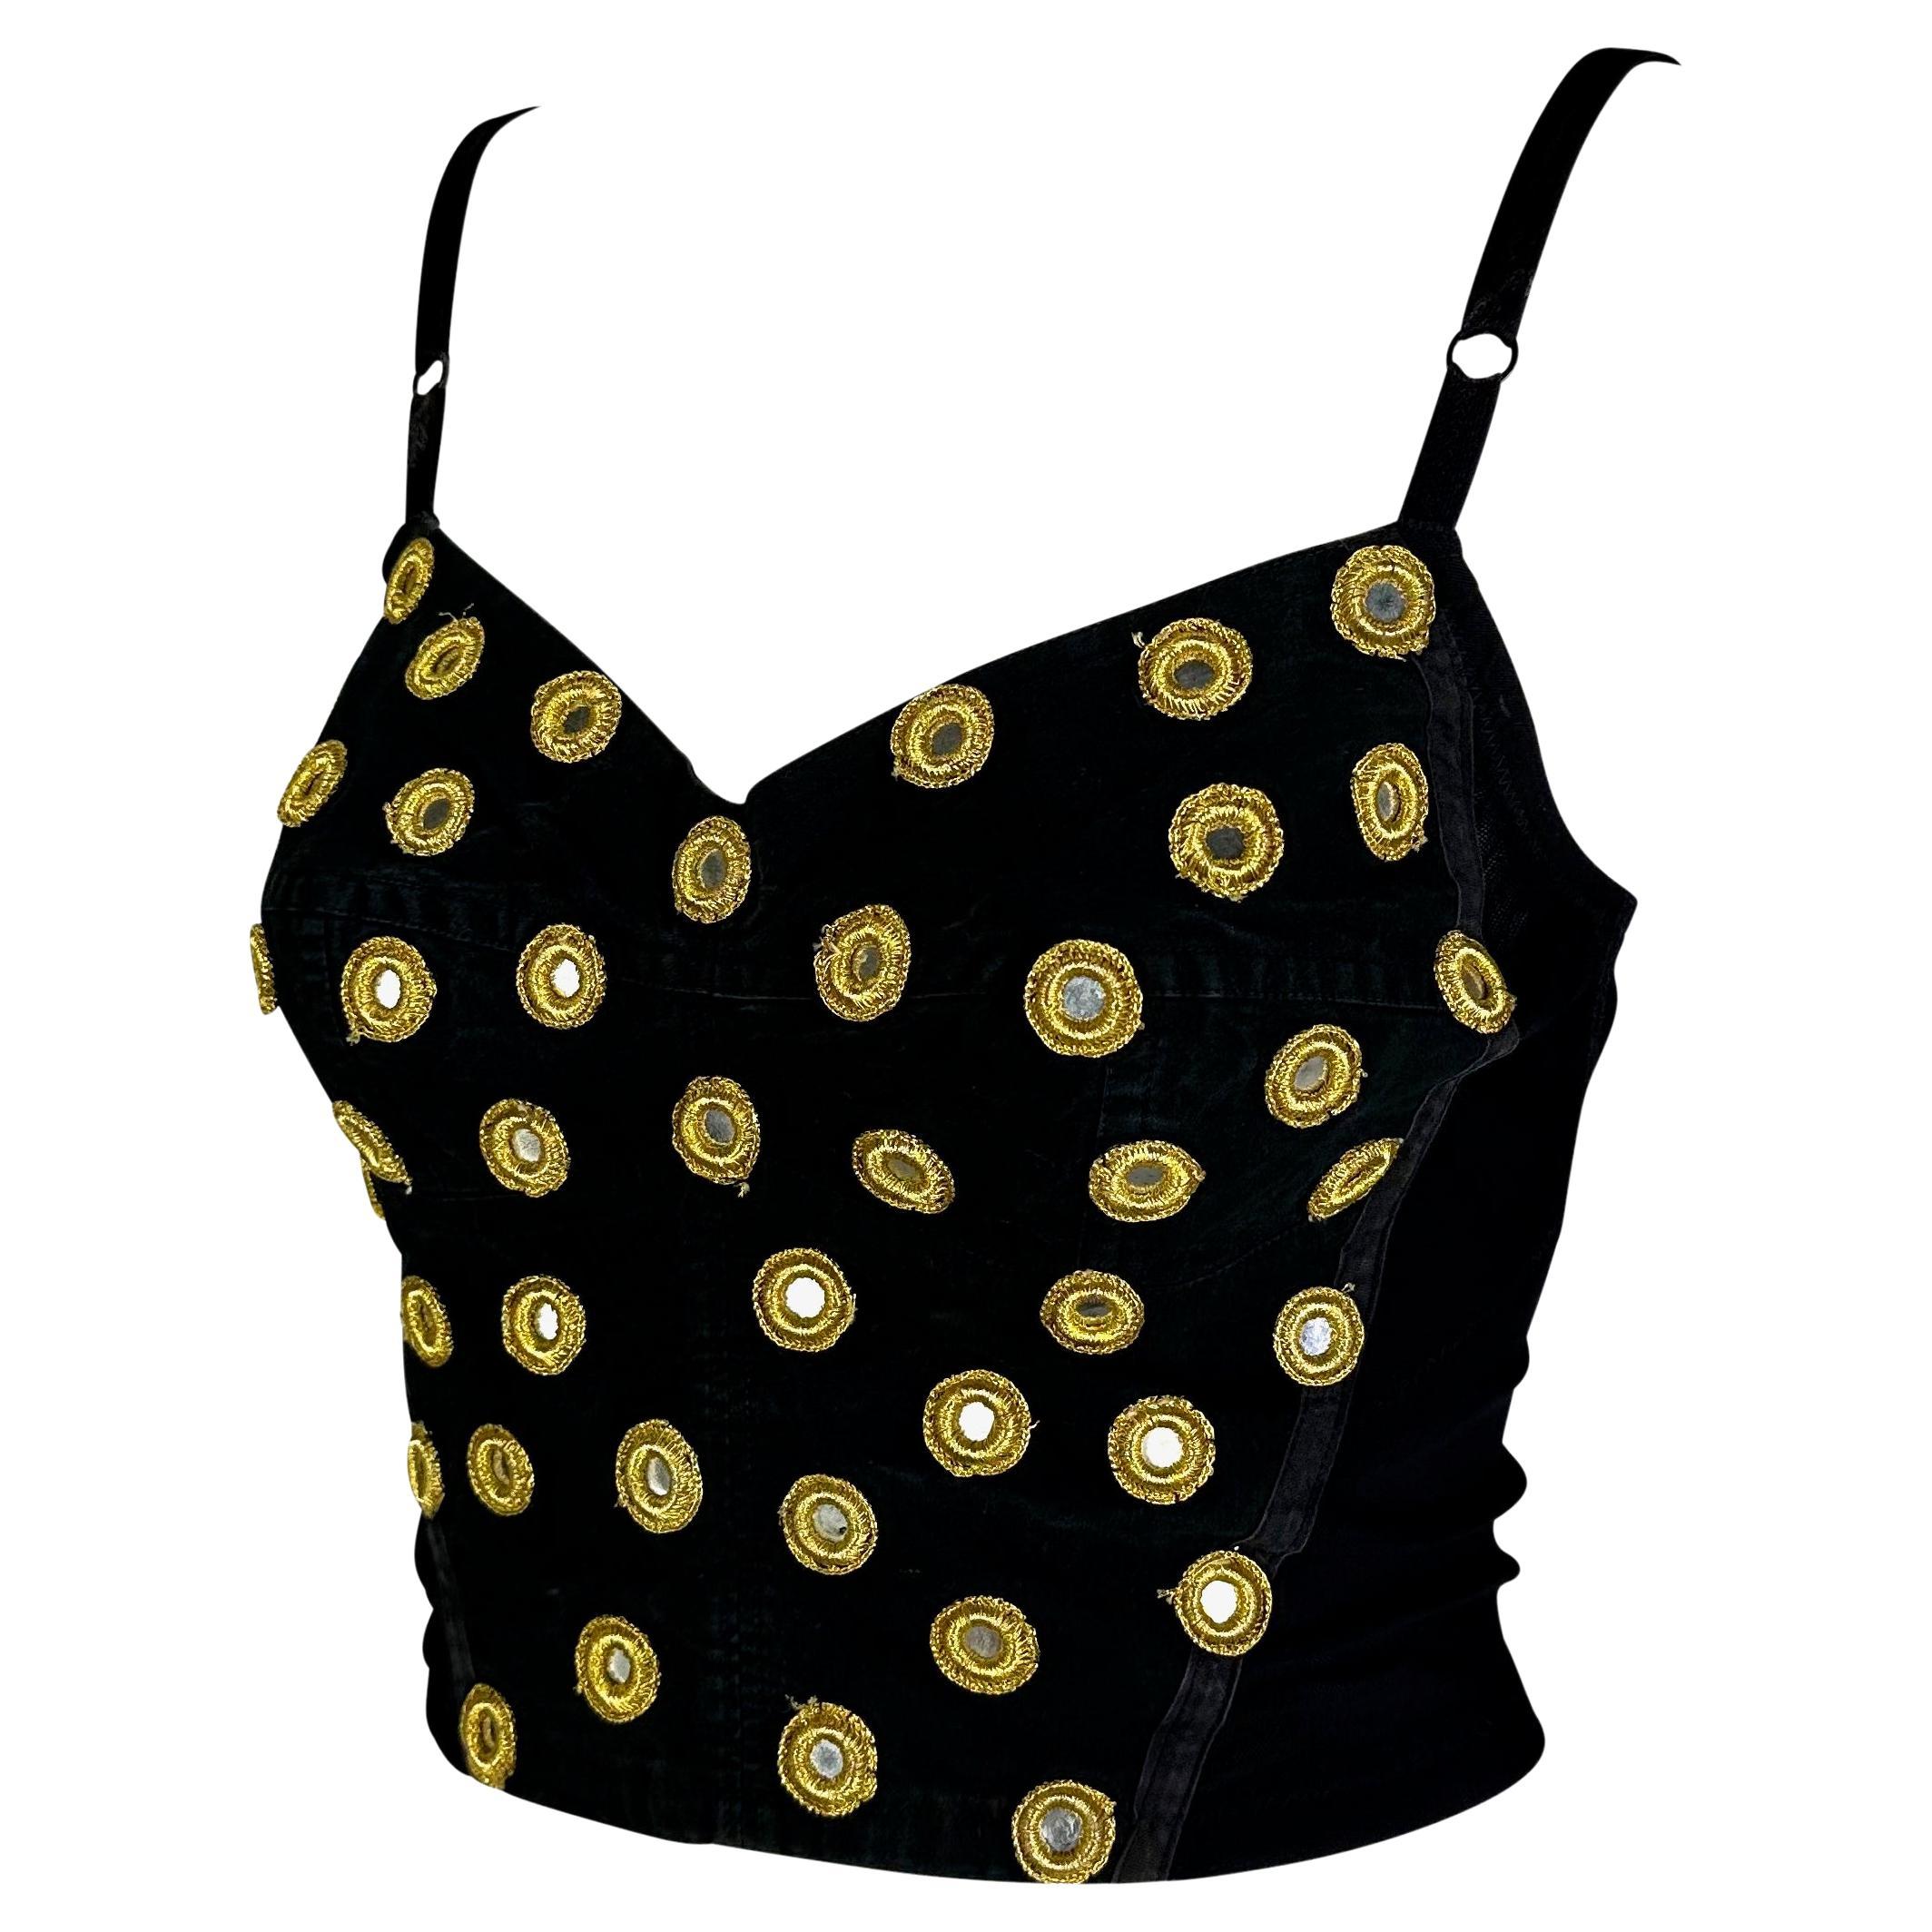 Presenting a beautiful black Dolce and Gabbana crop top. From the Fall/Winter 1992 collection, this incredible crop top features a sweetheart neckline and spaghetti straps. The front of this top is covered in silver mirrors surrounded by yellow